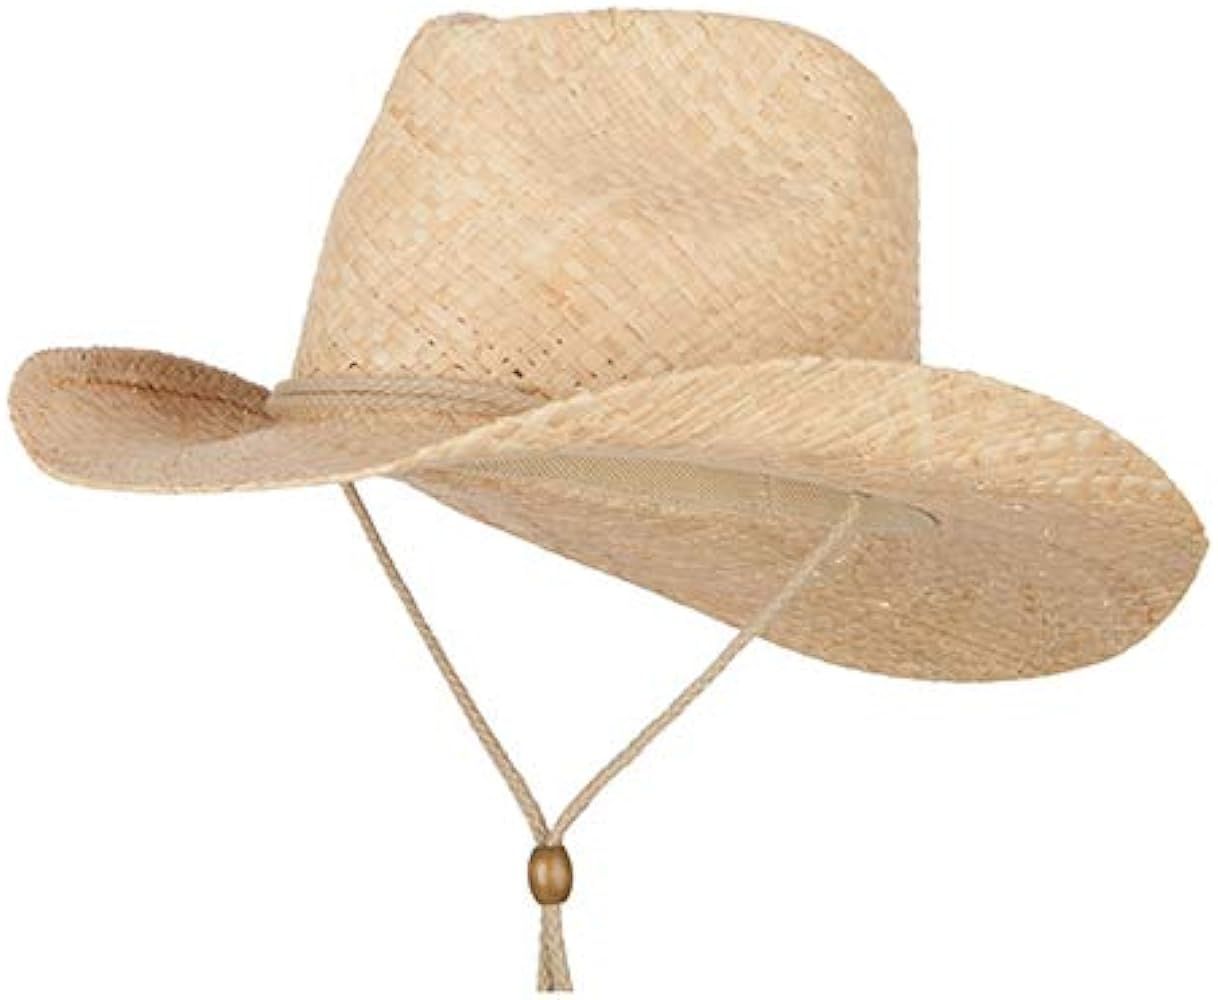 e4Hats.com Raffia Straw Outback Style Cowboy Hat with Chin Cord | Amazon (US)